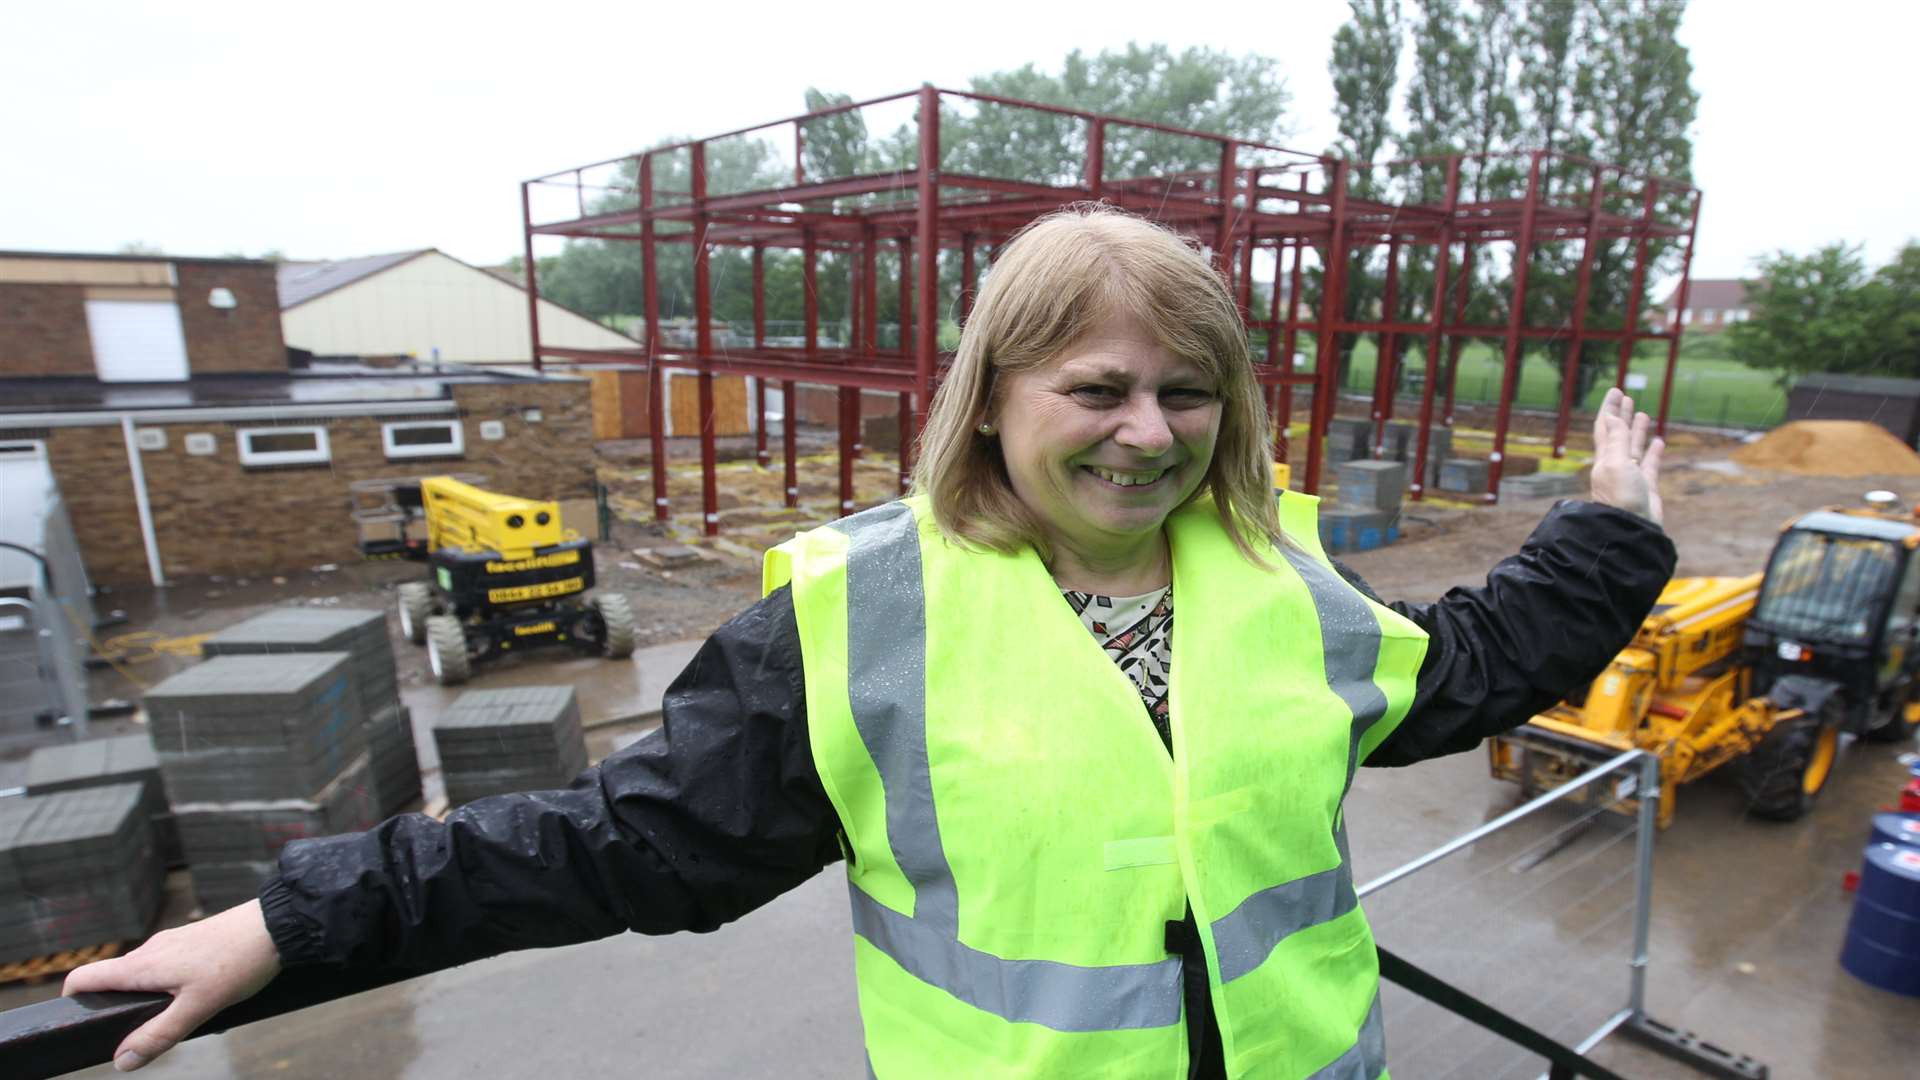 Caroline Mariner, Head of School at Iwade Primary School pointing to the new extension of the school